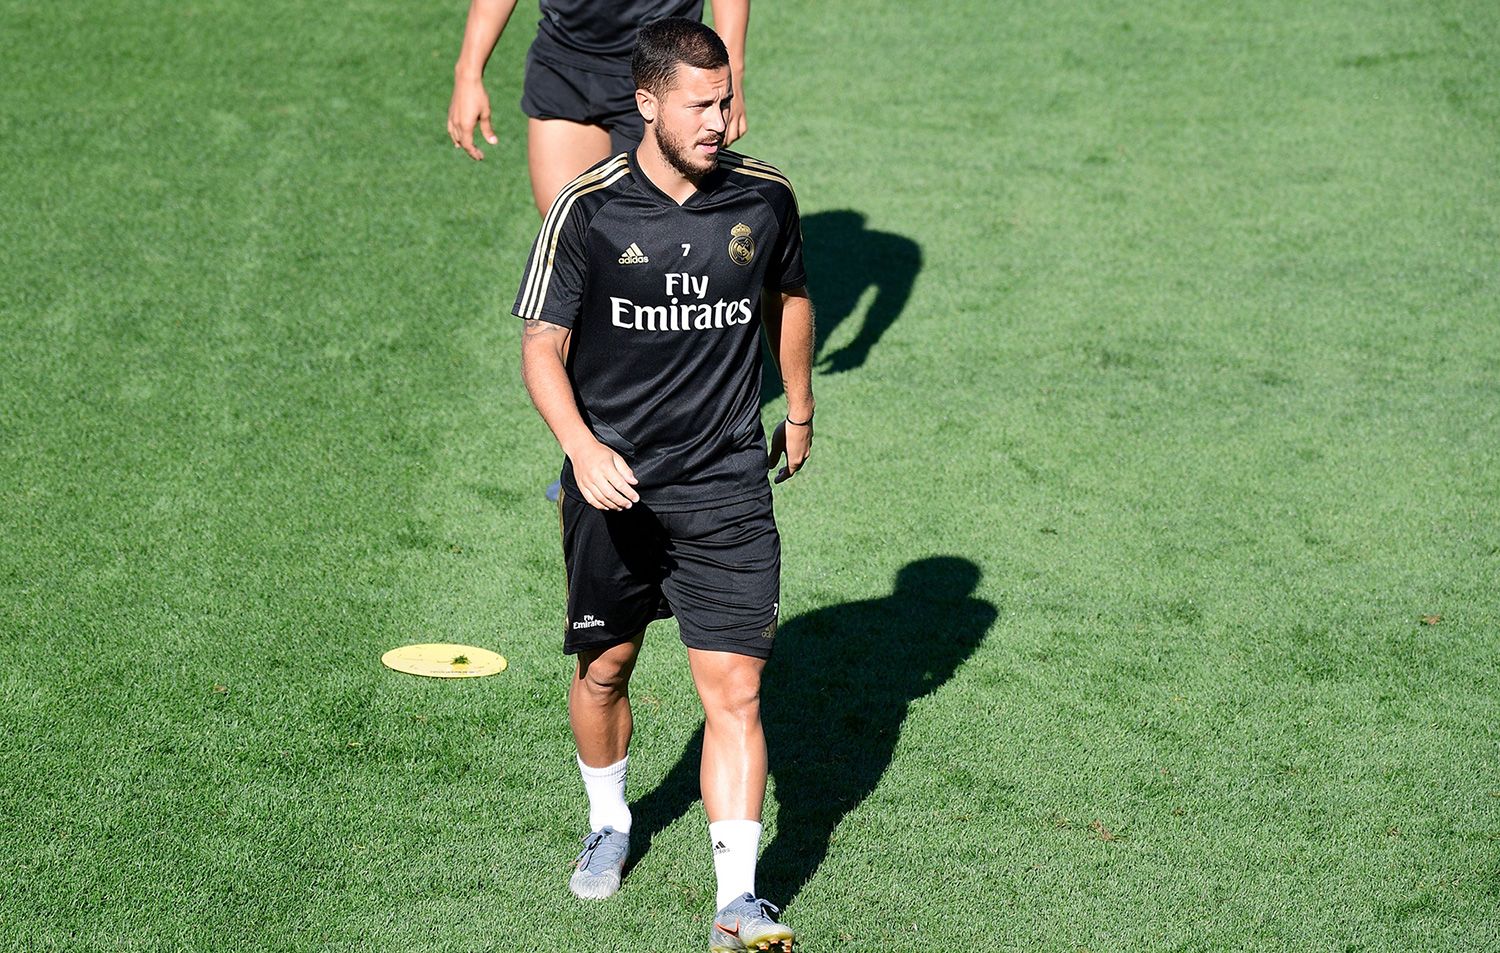 Eden Hazard in a training with the Real Madrid